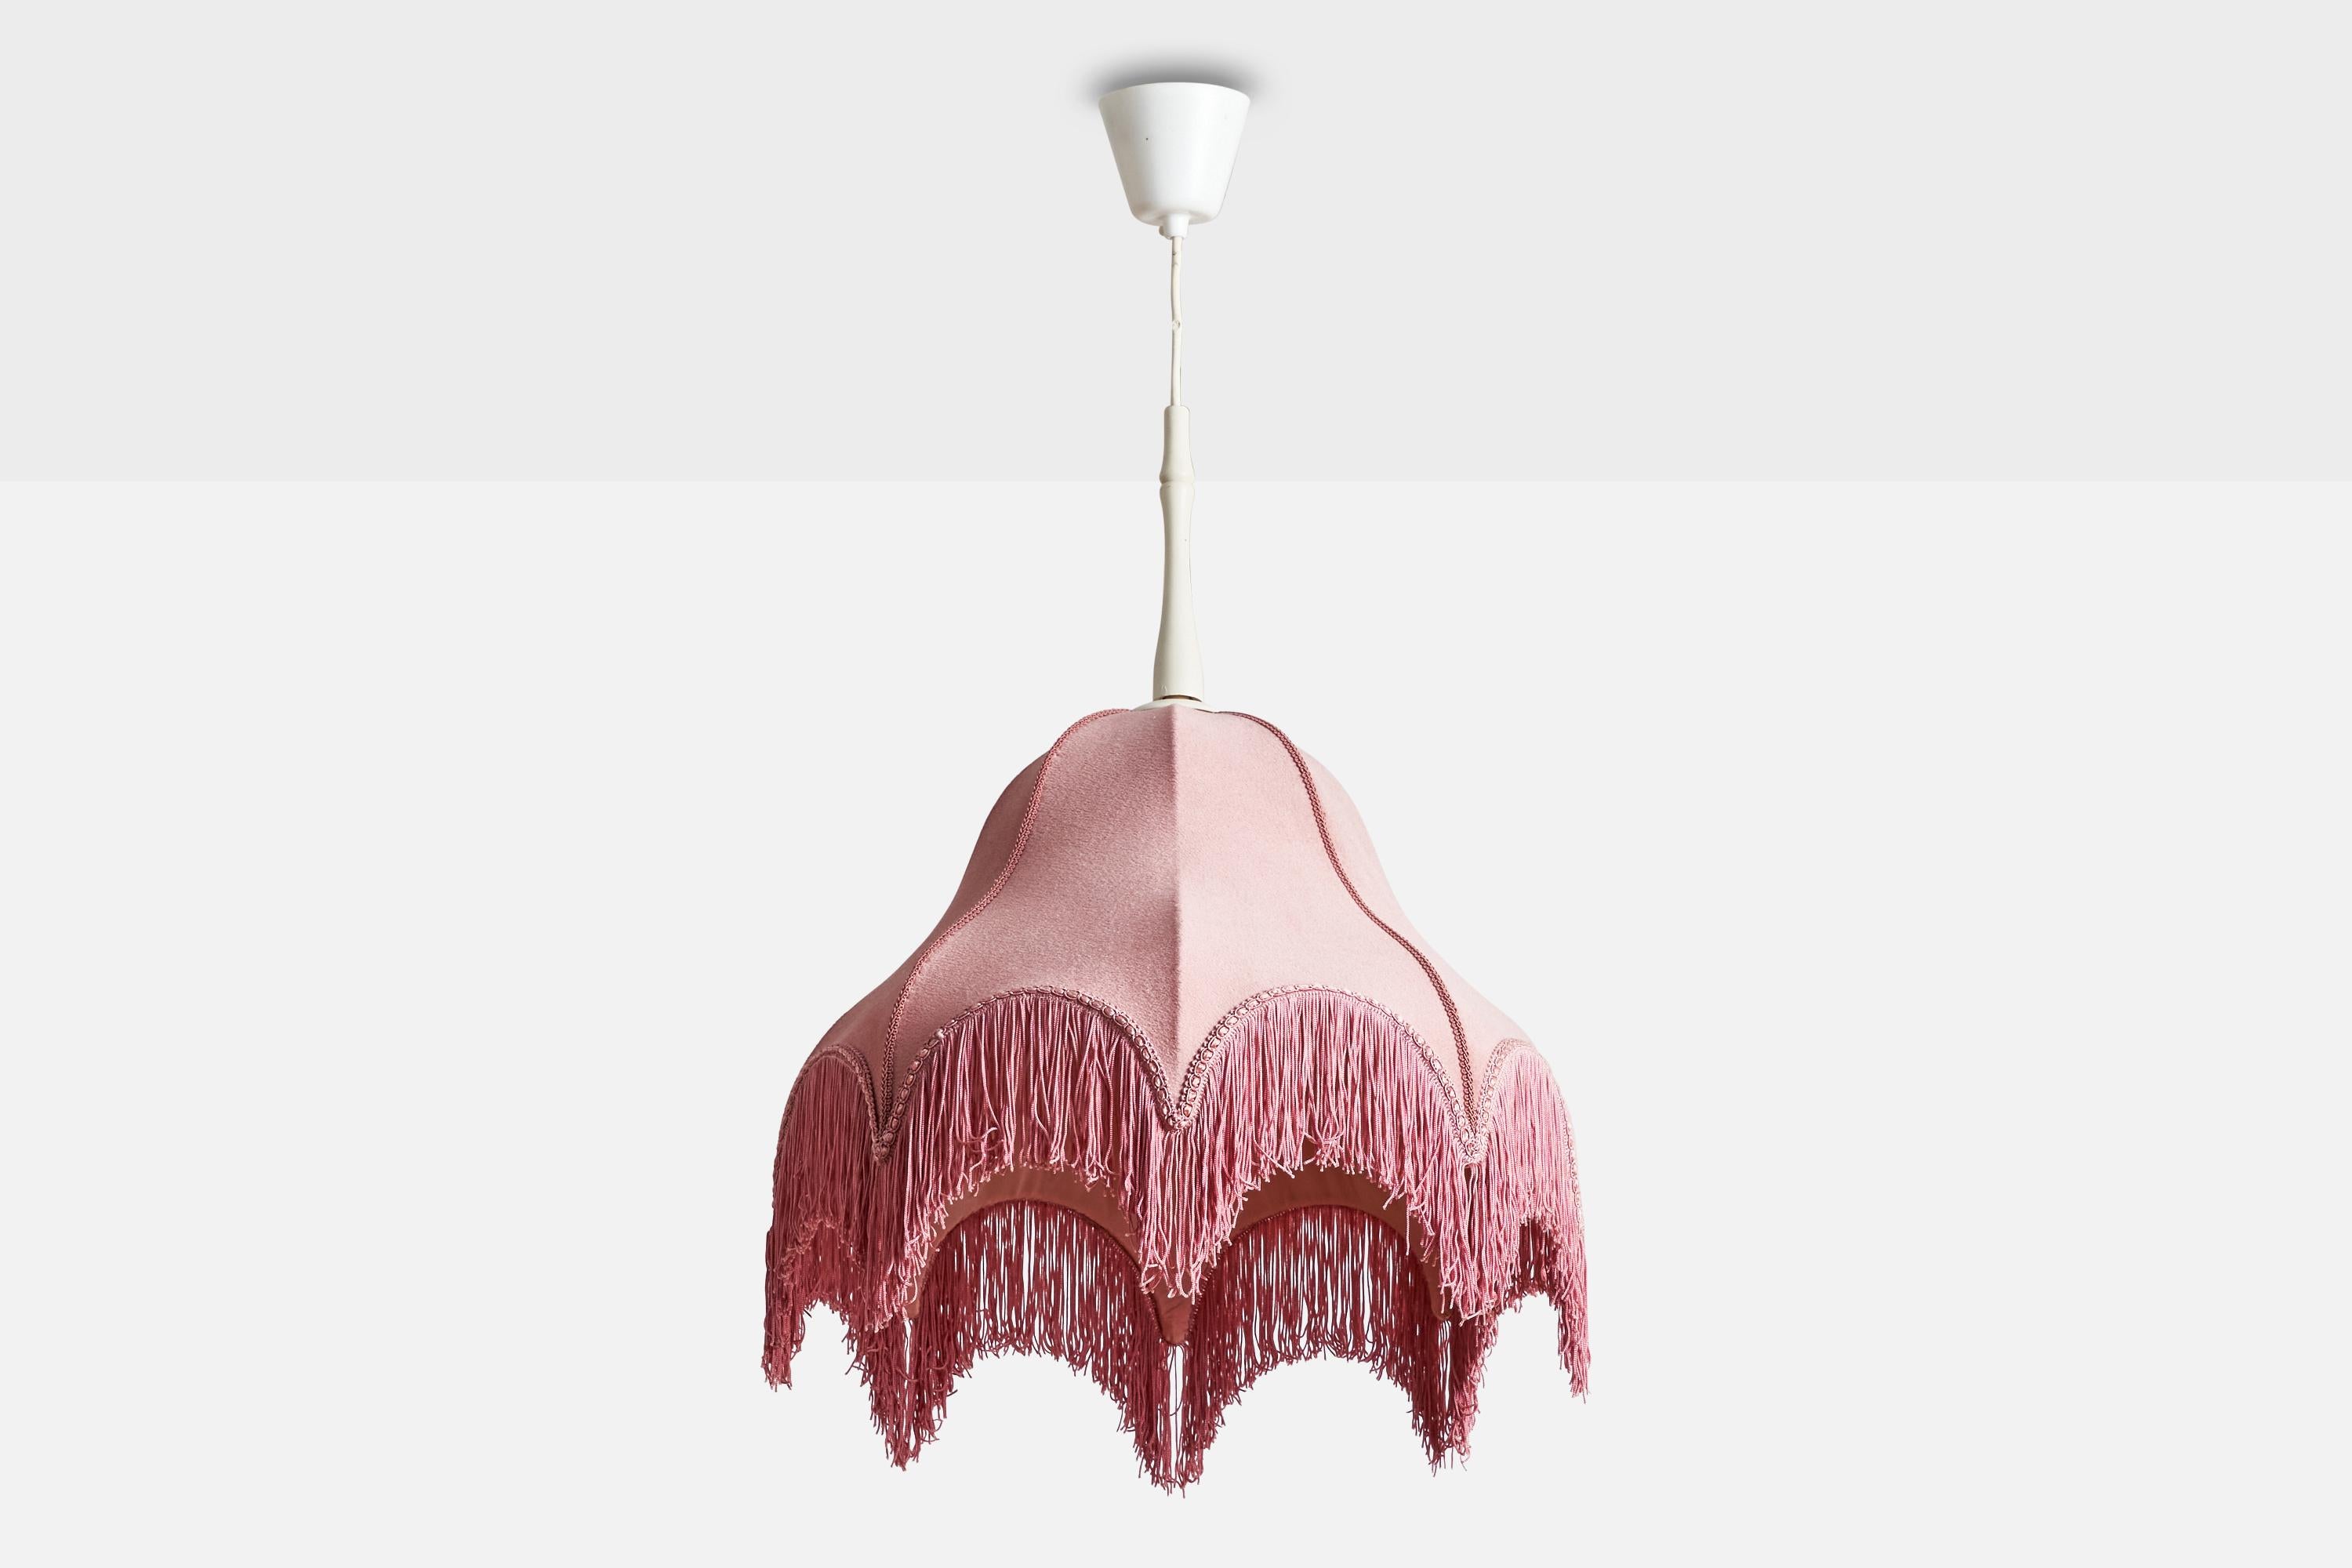 A pink fabric pendant light designed and produced in Sweden, c. 1940s.

Dimensions of canopy (inches): 2.75” H x 3.25” Diameter
Socket takes standard E-26 bulbs. 1 socket.There is no maximum wattage stated on the fixture. All lighting will be